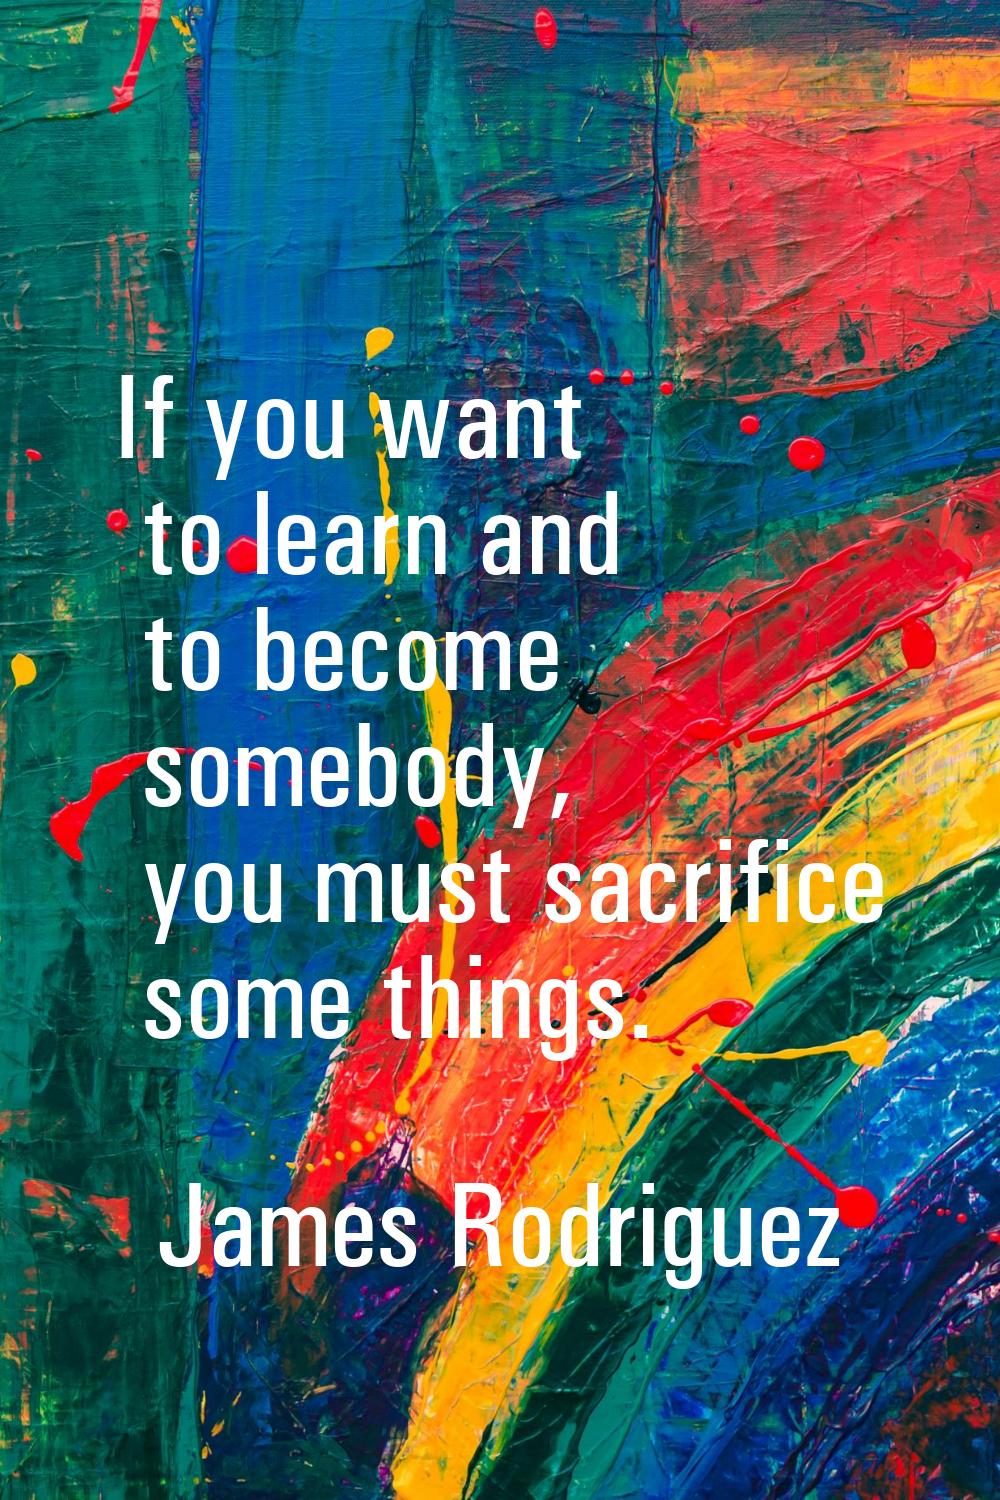 If you want to learn and to become somebody, you must sacrifice some things.